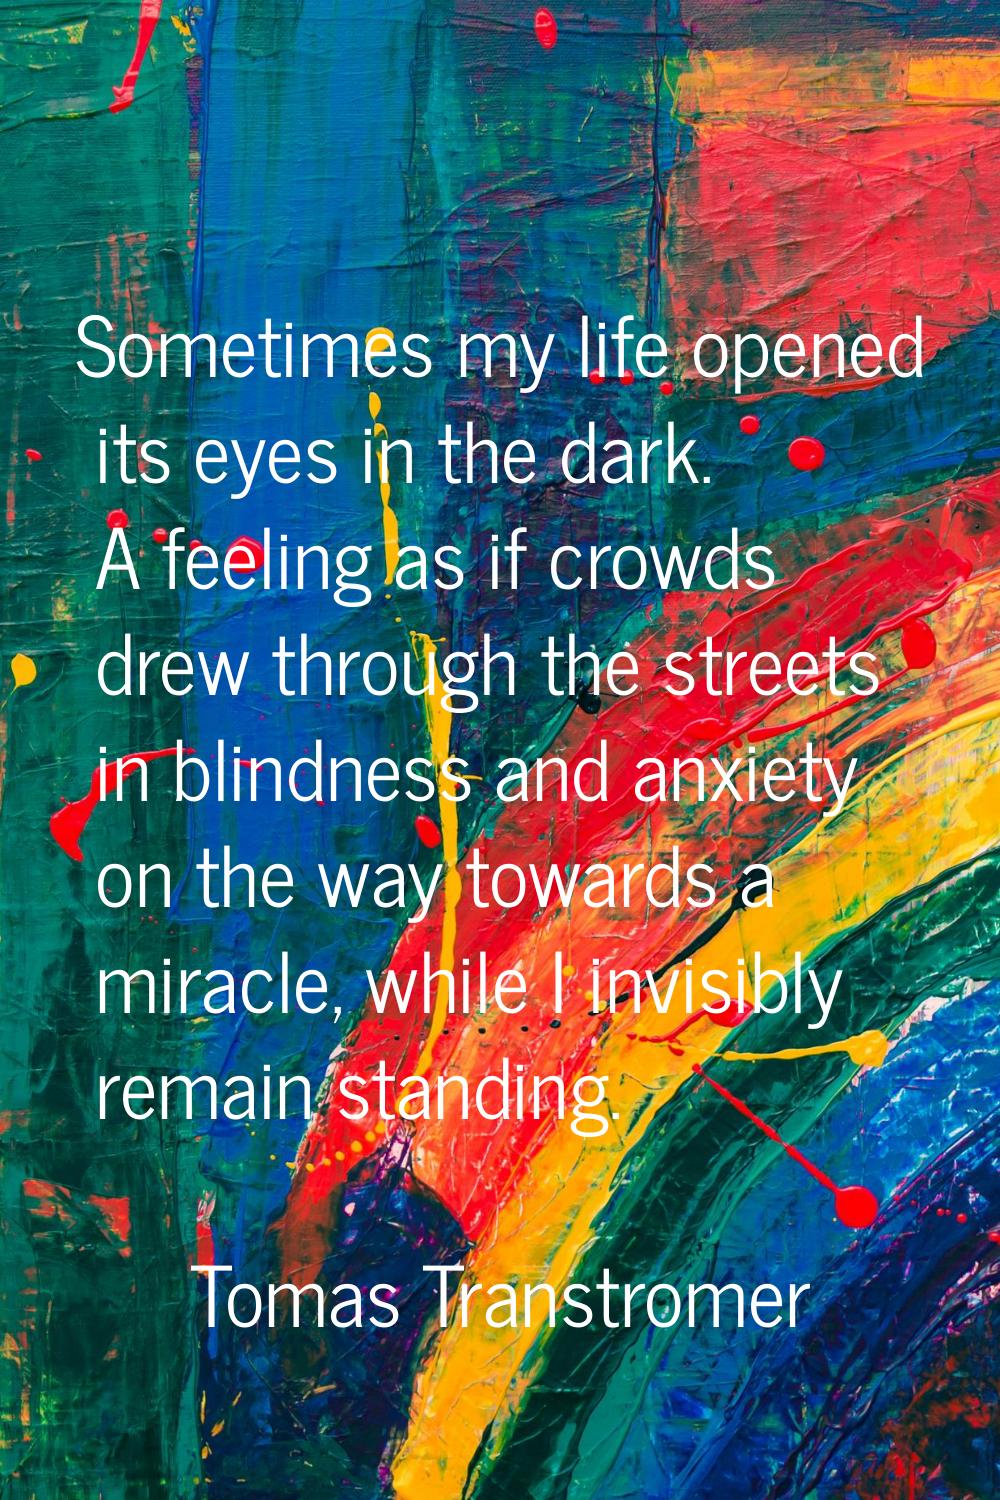 Sometimes my life opened its eyes in the dark. A feeling as if crowds drew through the streets in b